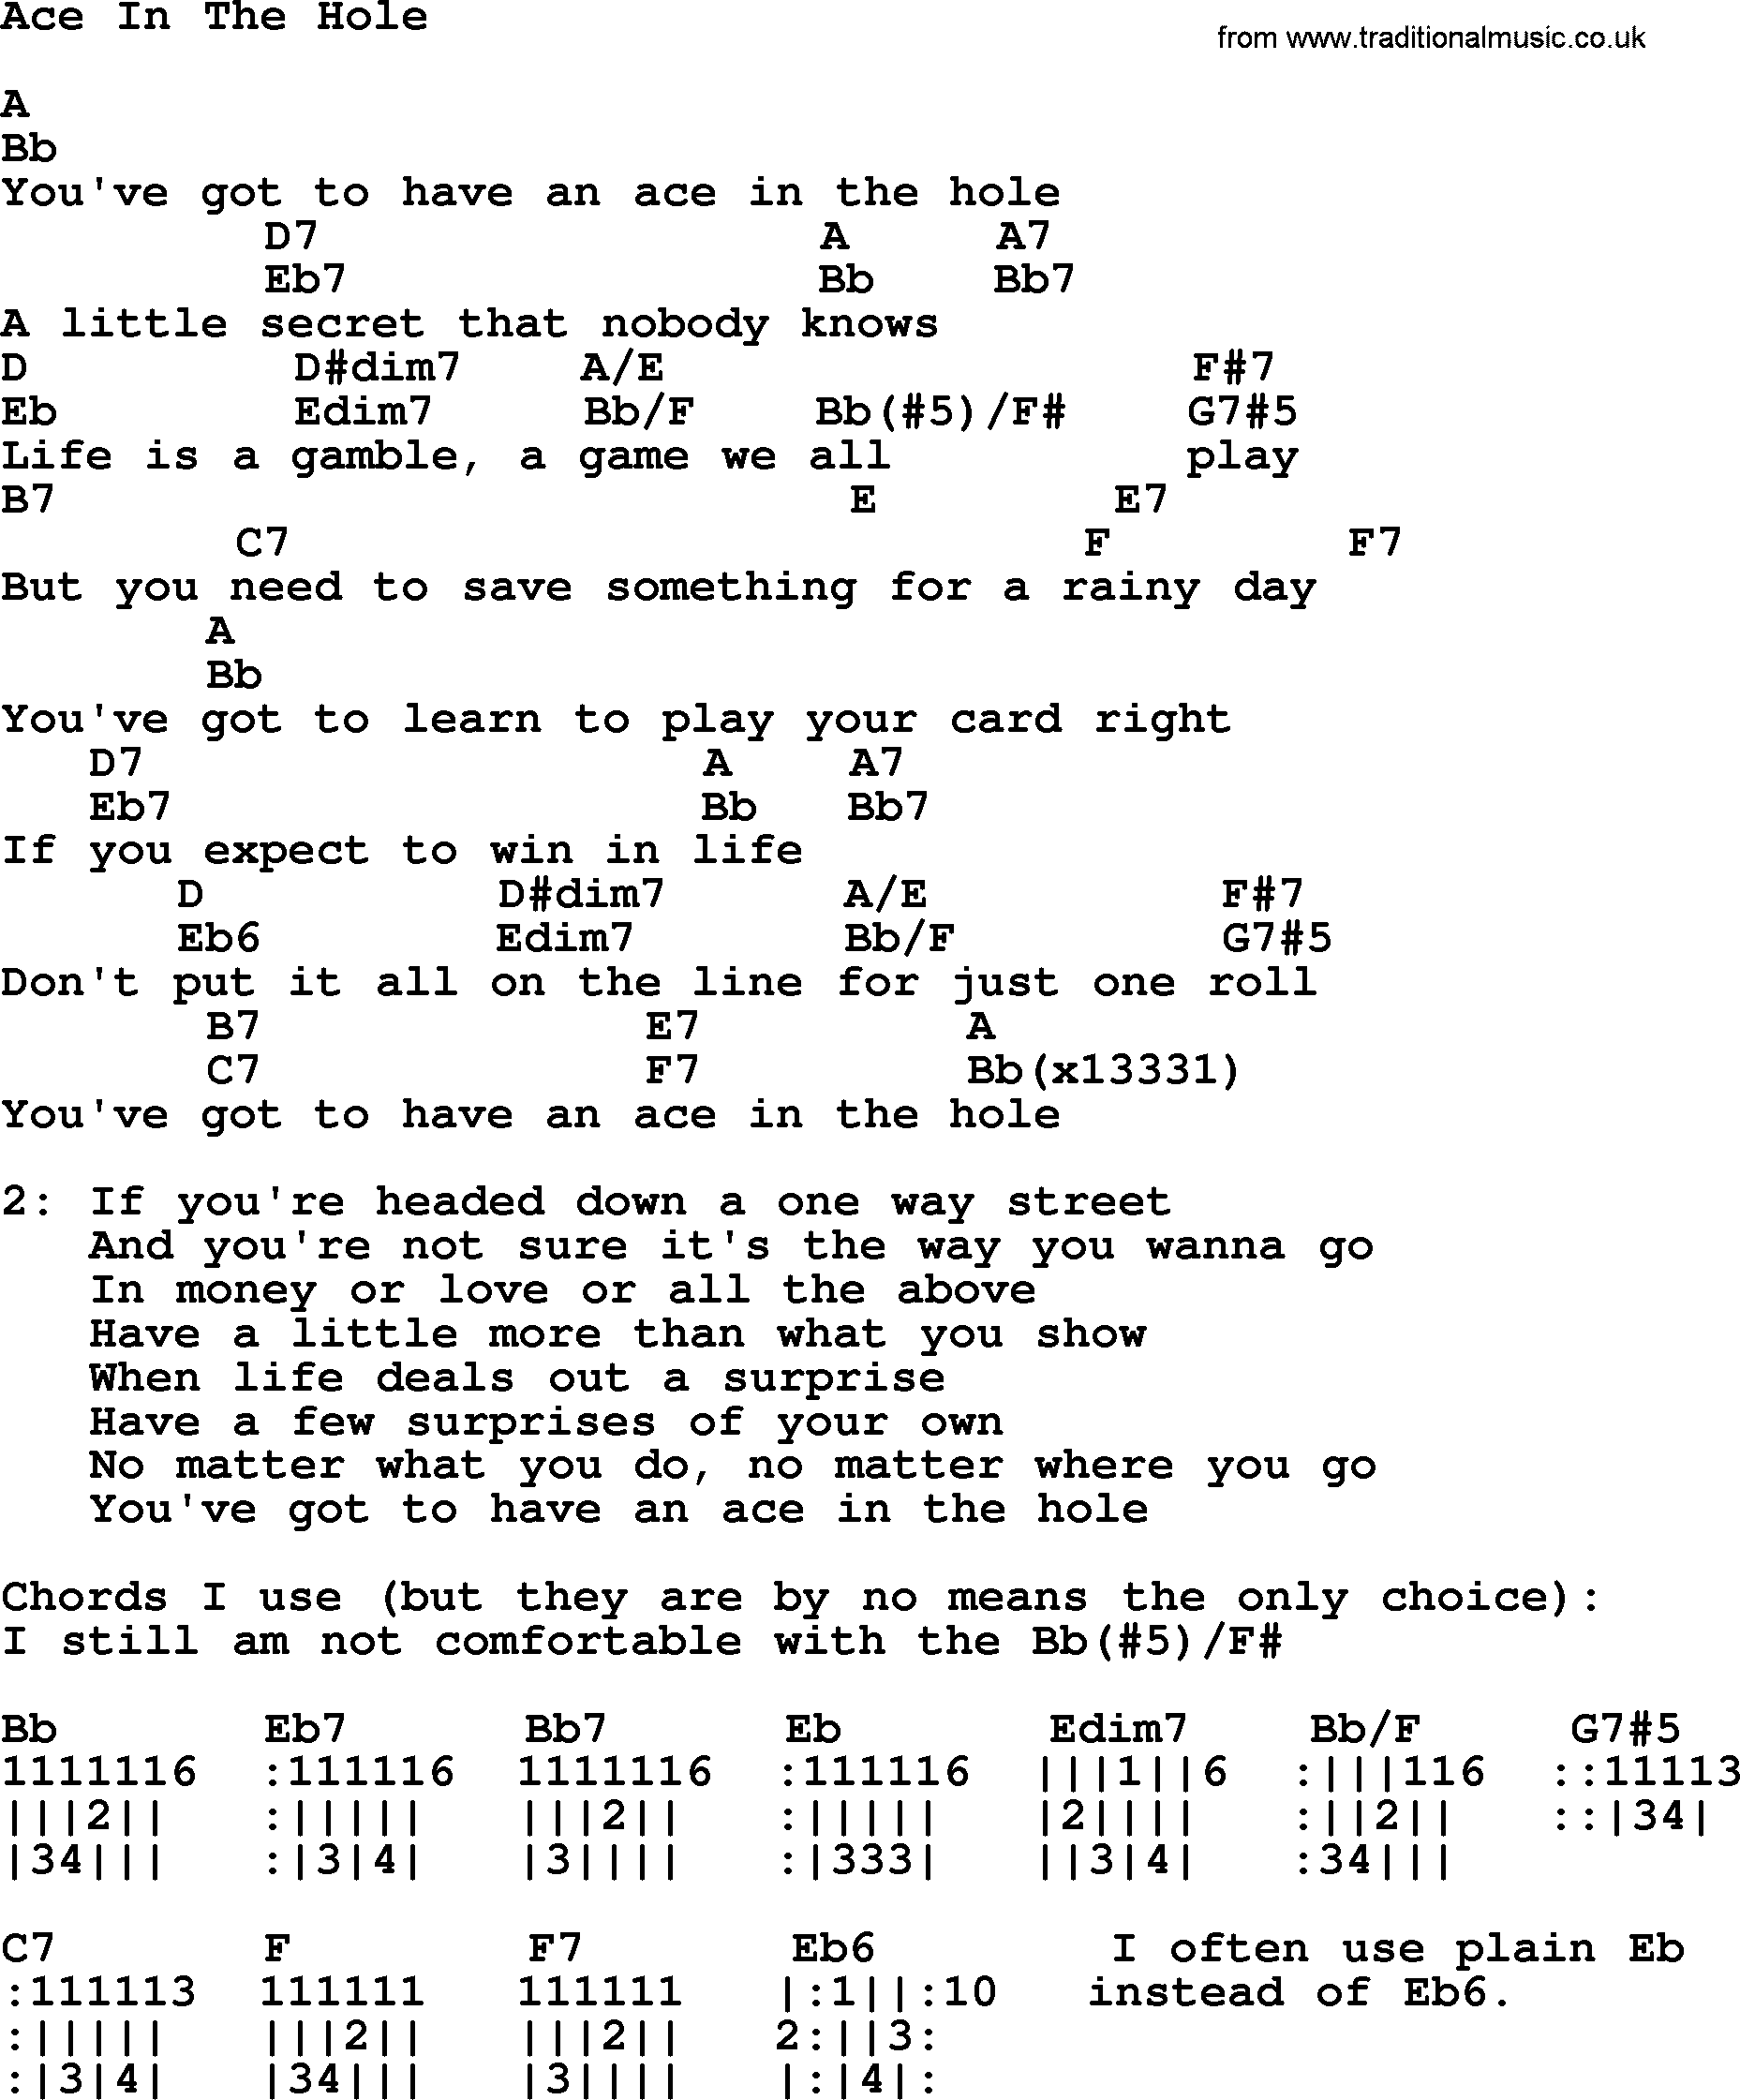 Ace In The Hole, by George Strait - lyrics and chords